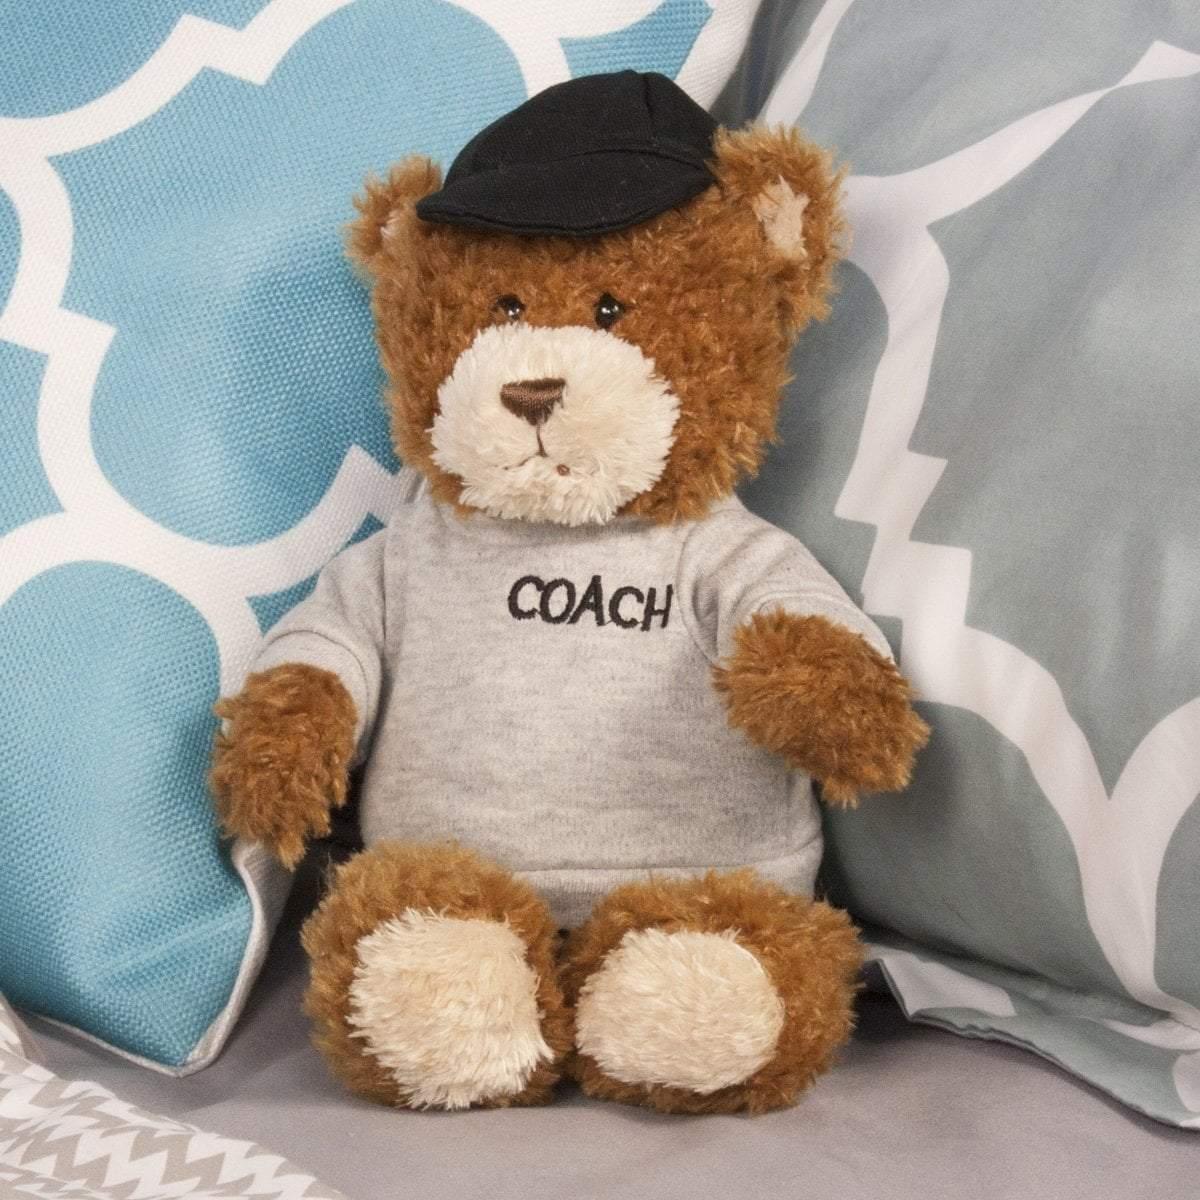 "Johnny" the 11in Coach Career Bear by Gund